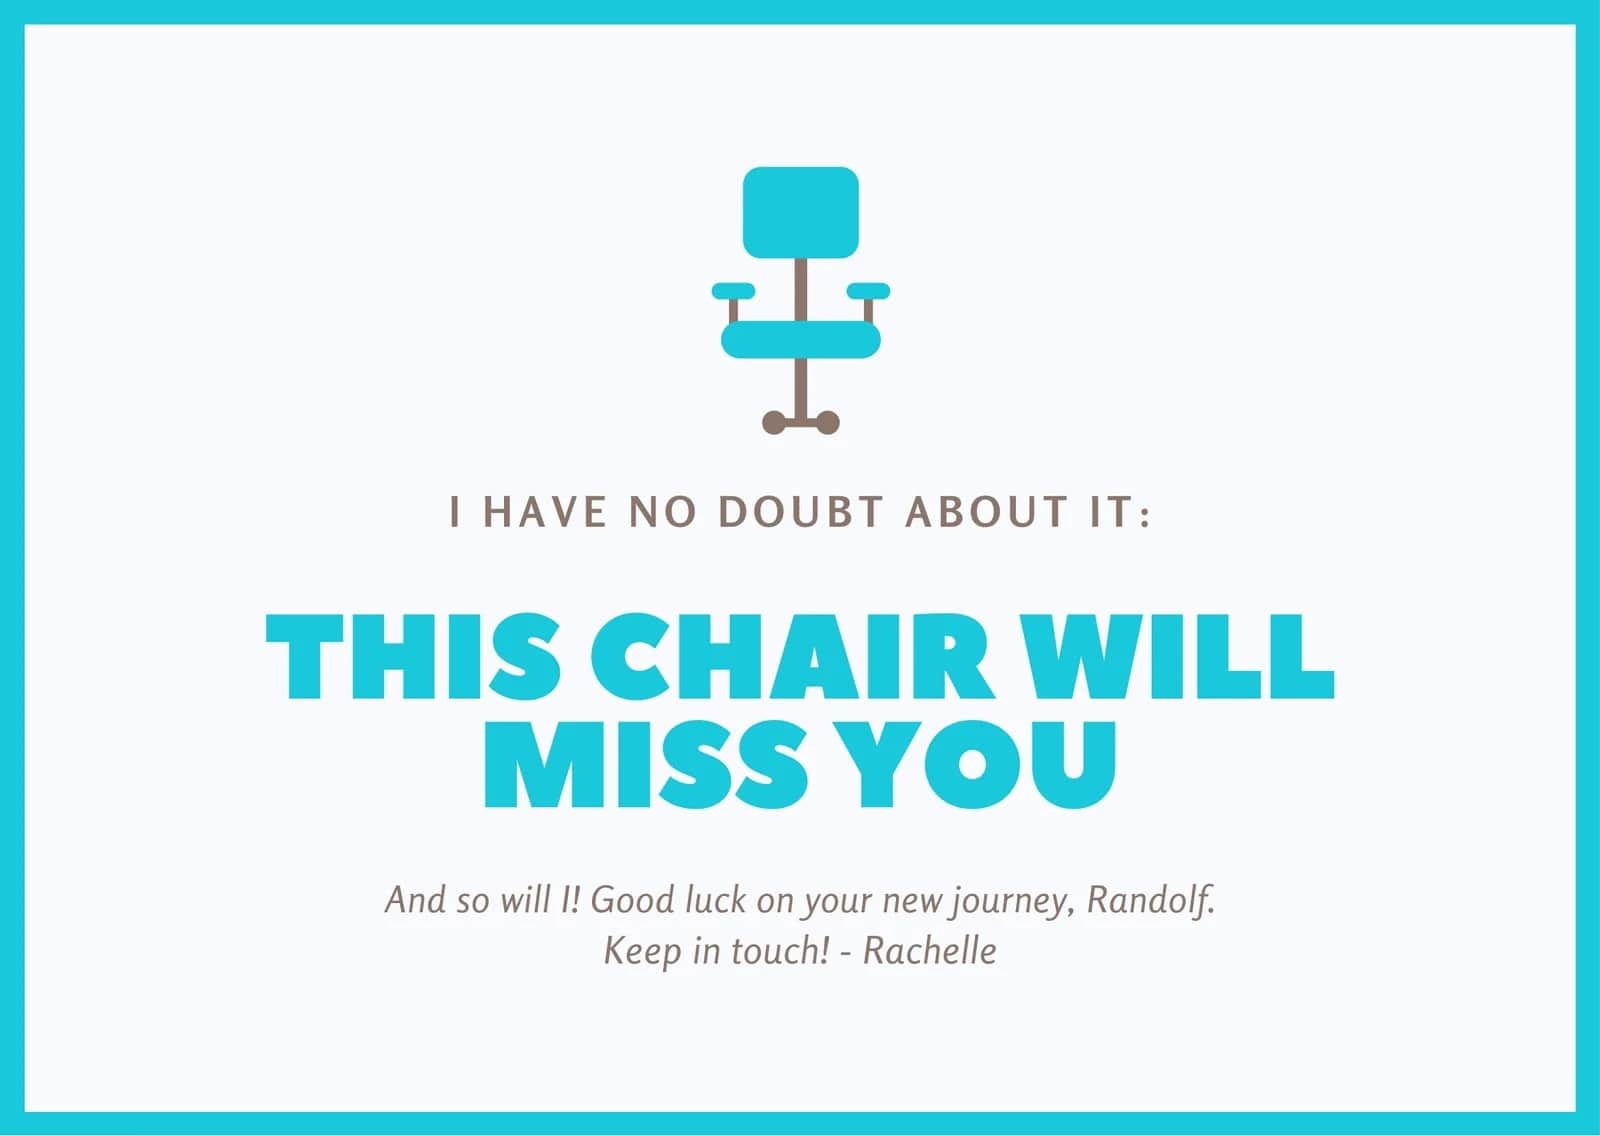 Printable Goodbye Cards For Co-Workers Example_19348